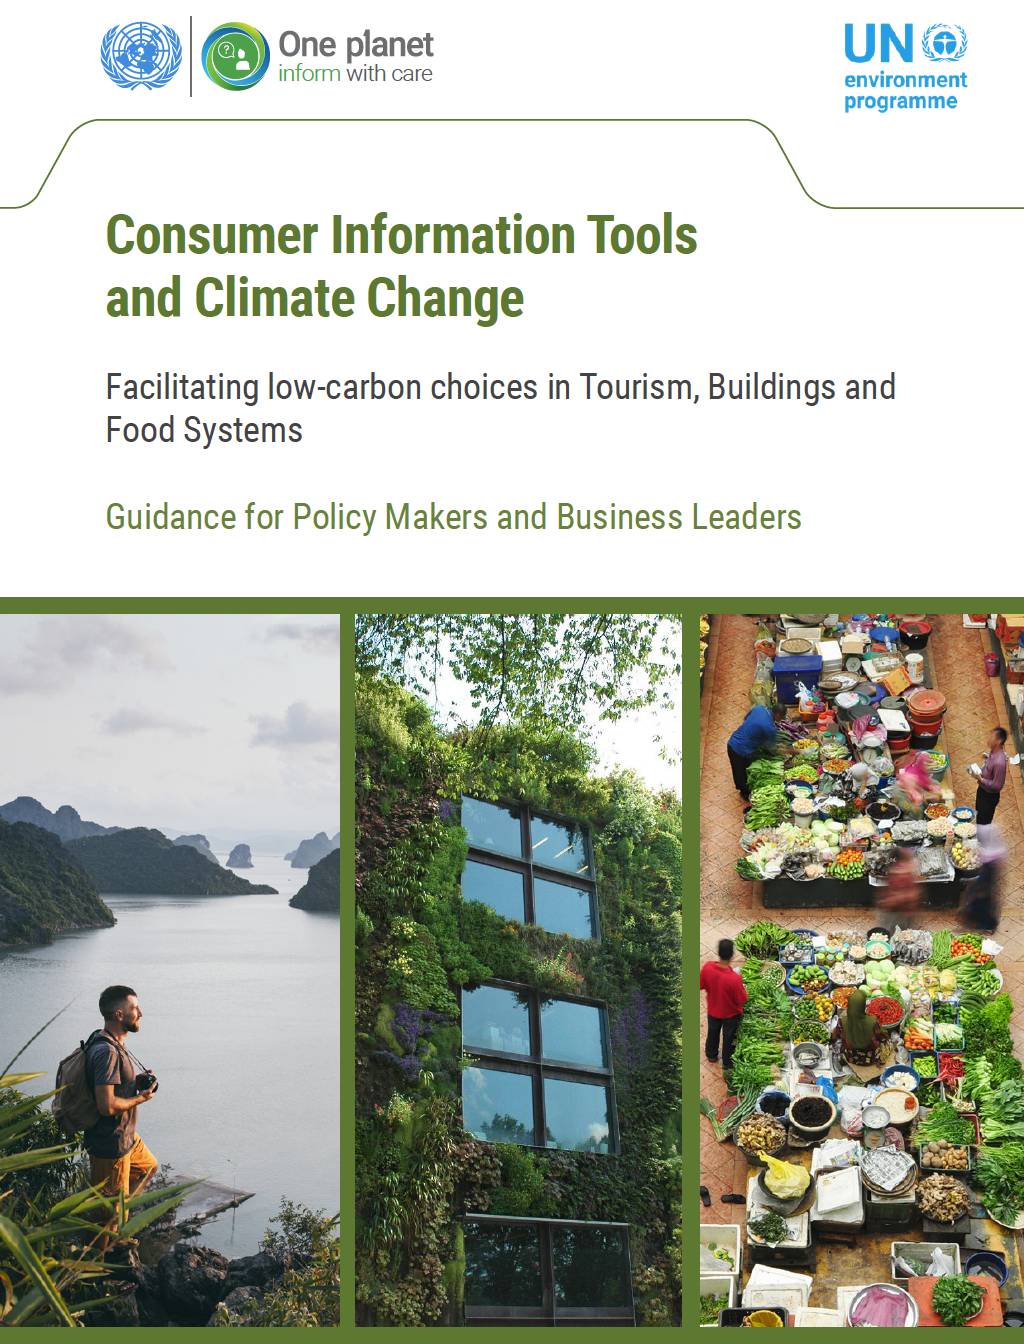 Consumer Information Tools and Climate Change